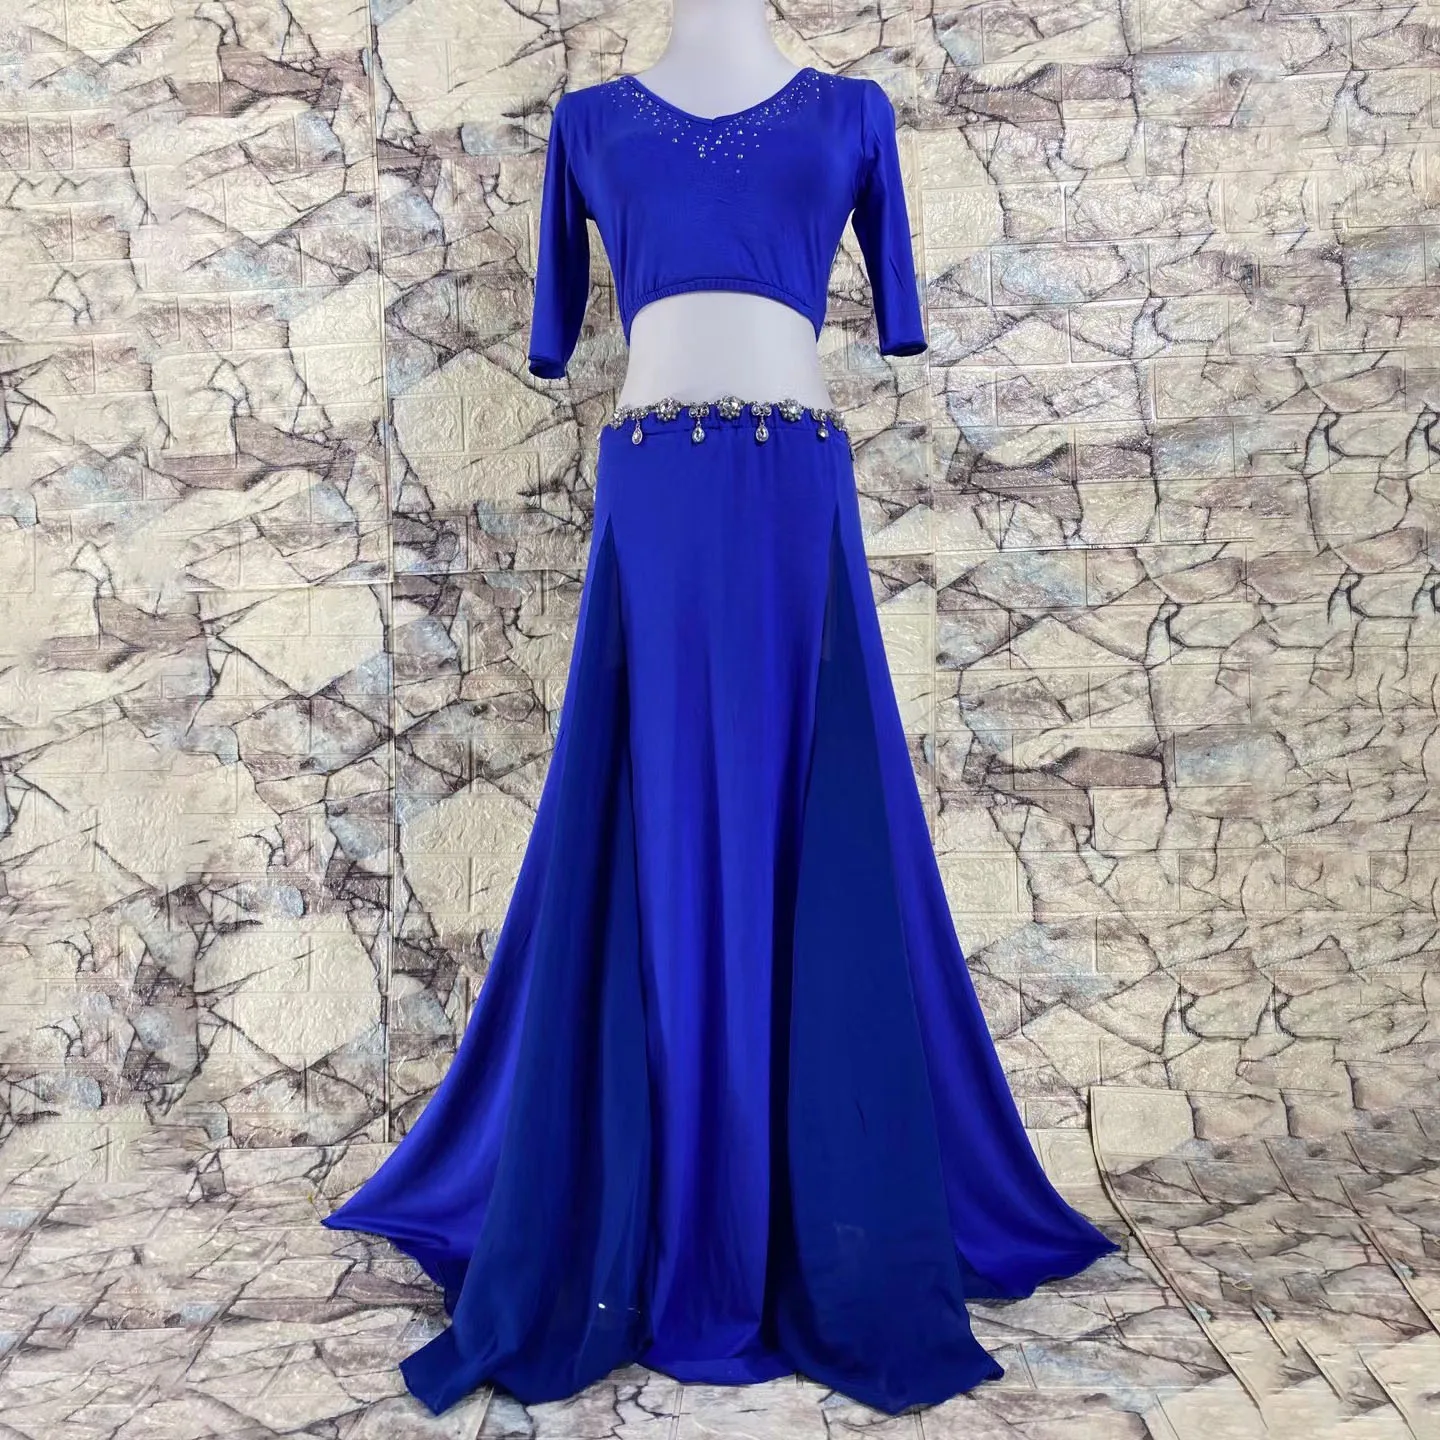 

Adult Belly Dance Practice Costume Modal Sexy Top Short/Long Split Skirt Women Oriental Indian Dancing Training Group Clothing